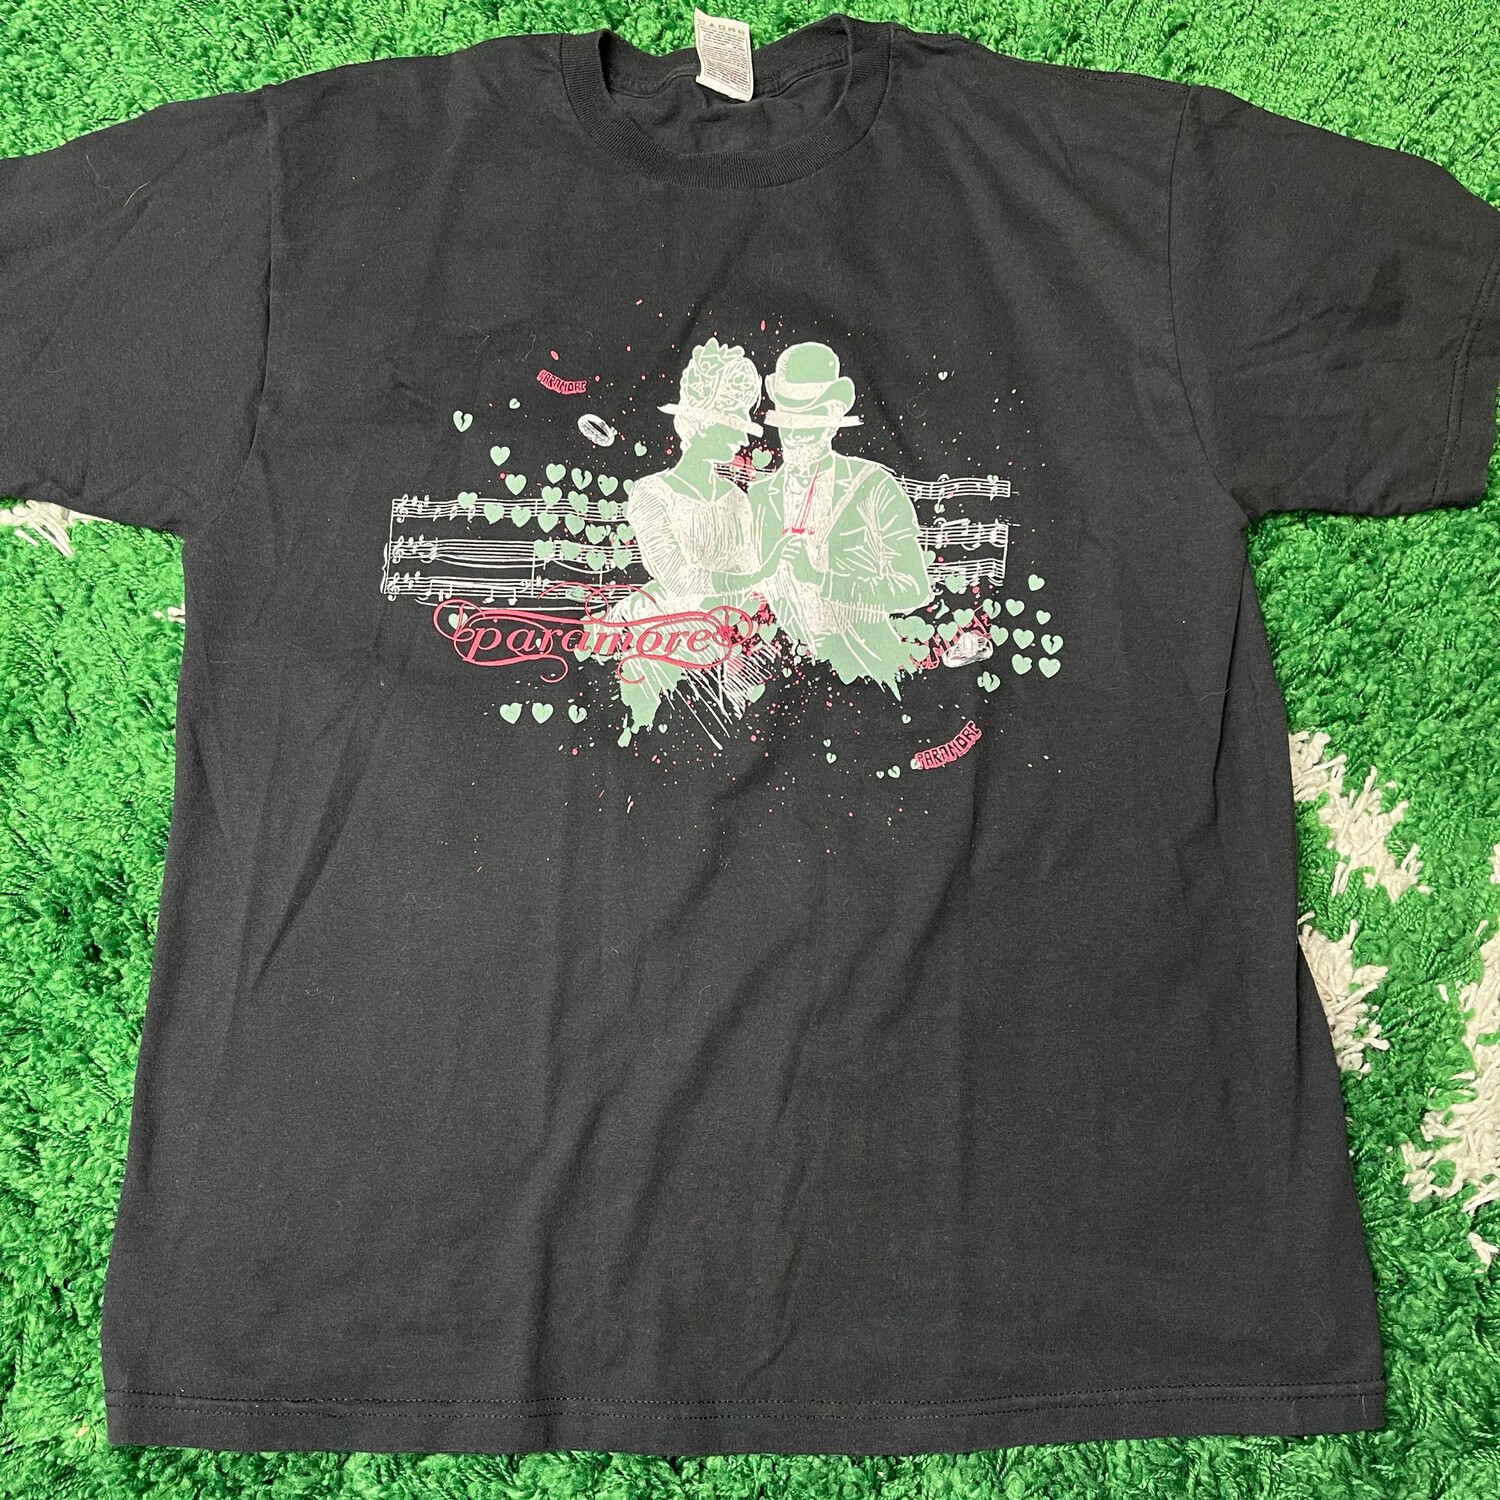 Paramore Tee Size Large